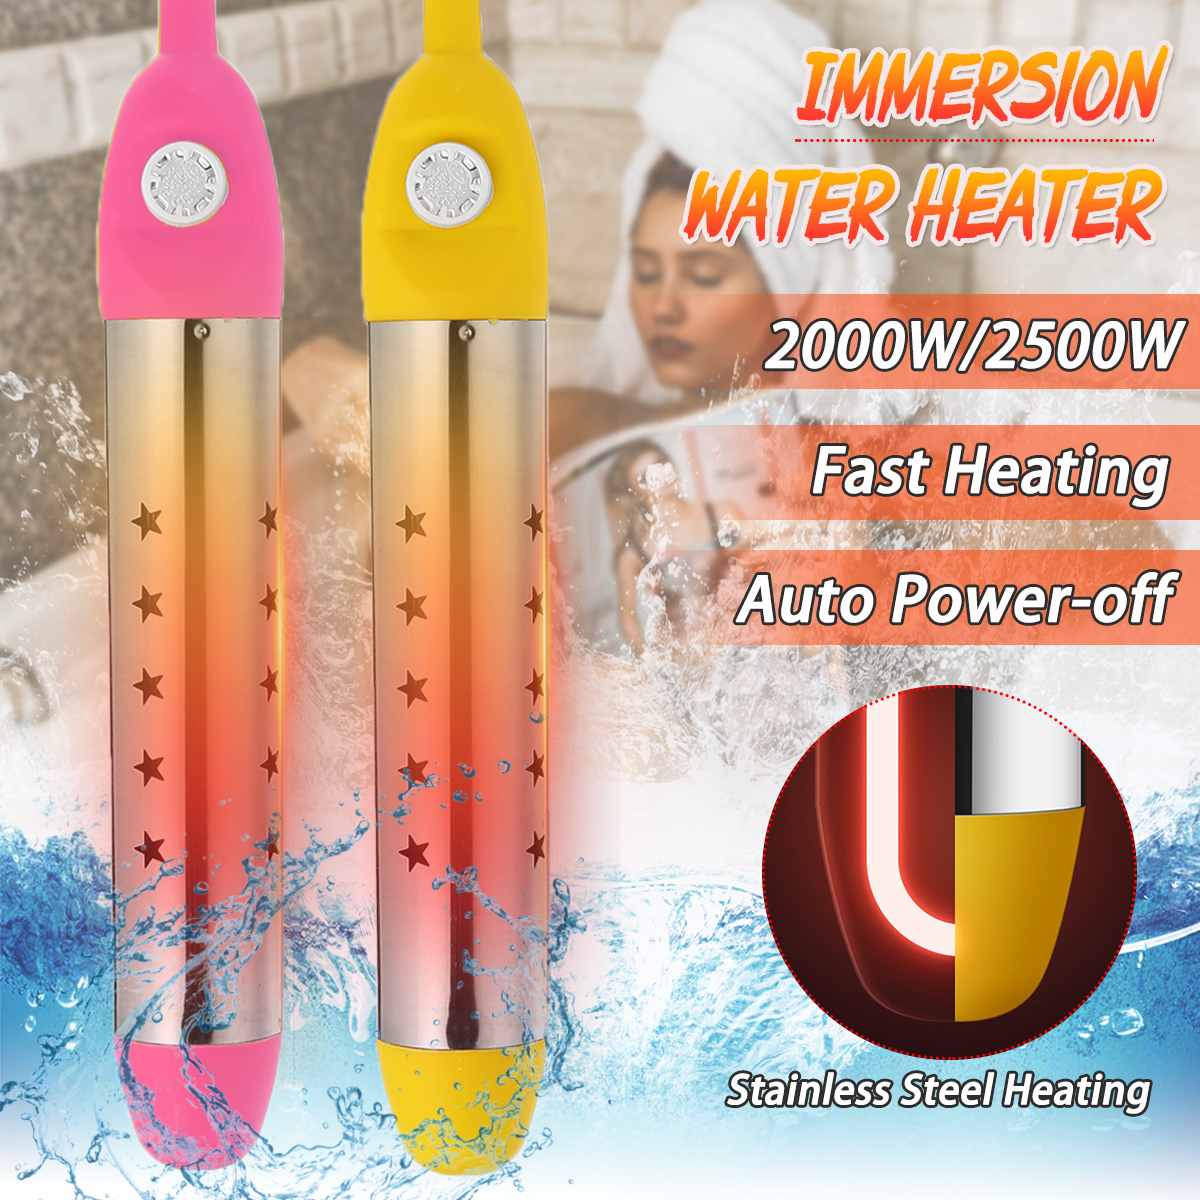 2000W / 2500W 220V Floating Electric Water Boiler Water Heating Portable Immersion Suspension Bathroom Swimming Pool